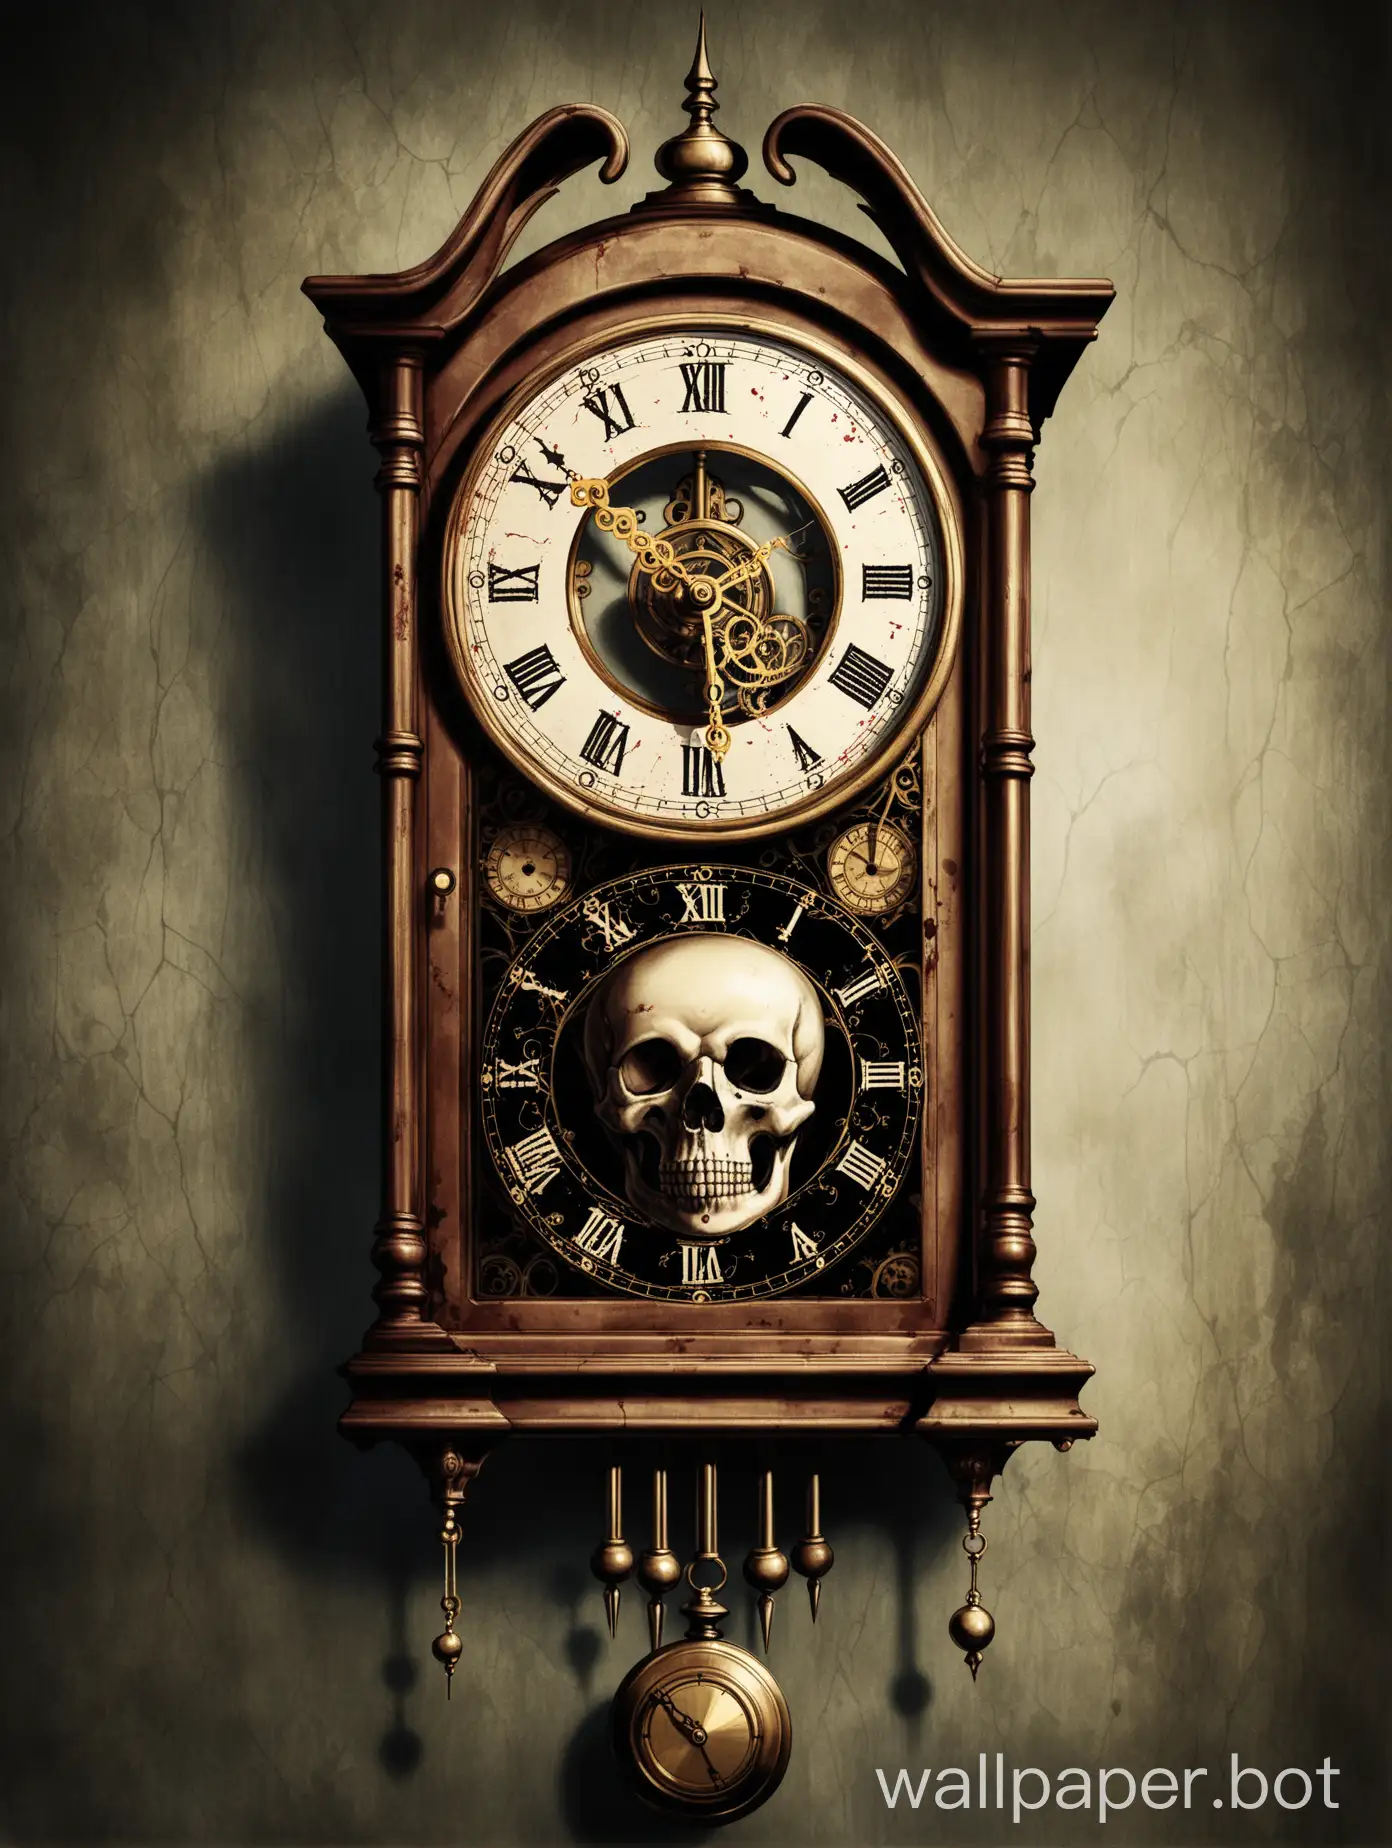 Haunted-Antique-Clock-with-Bloody-Surroundings-Souls-Gather-at-5-Minutes-to-Twelve